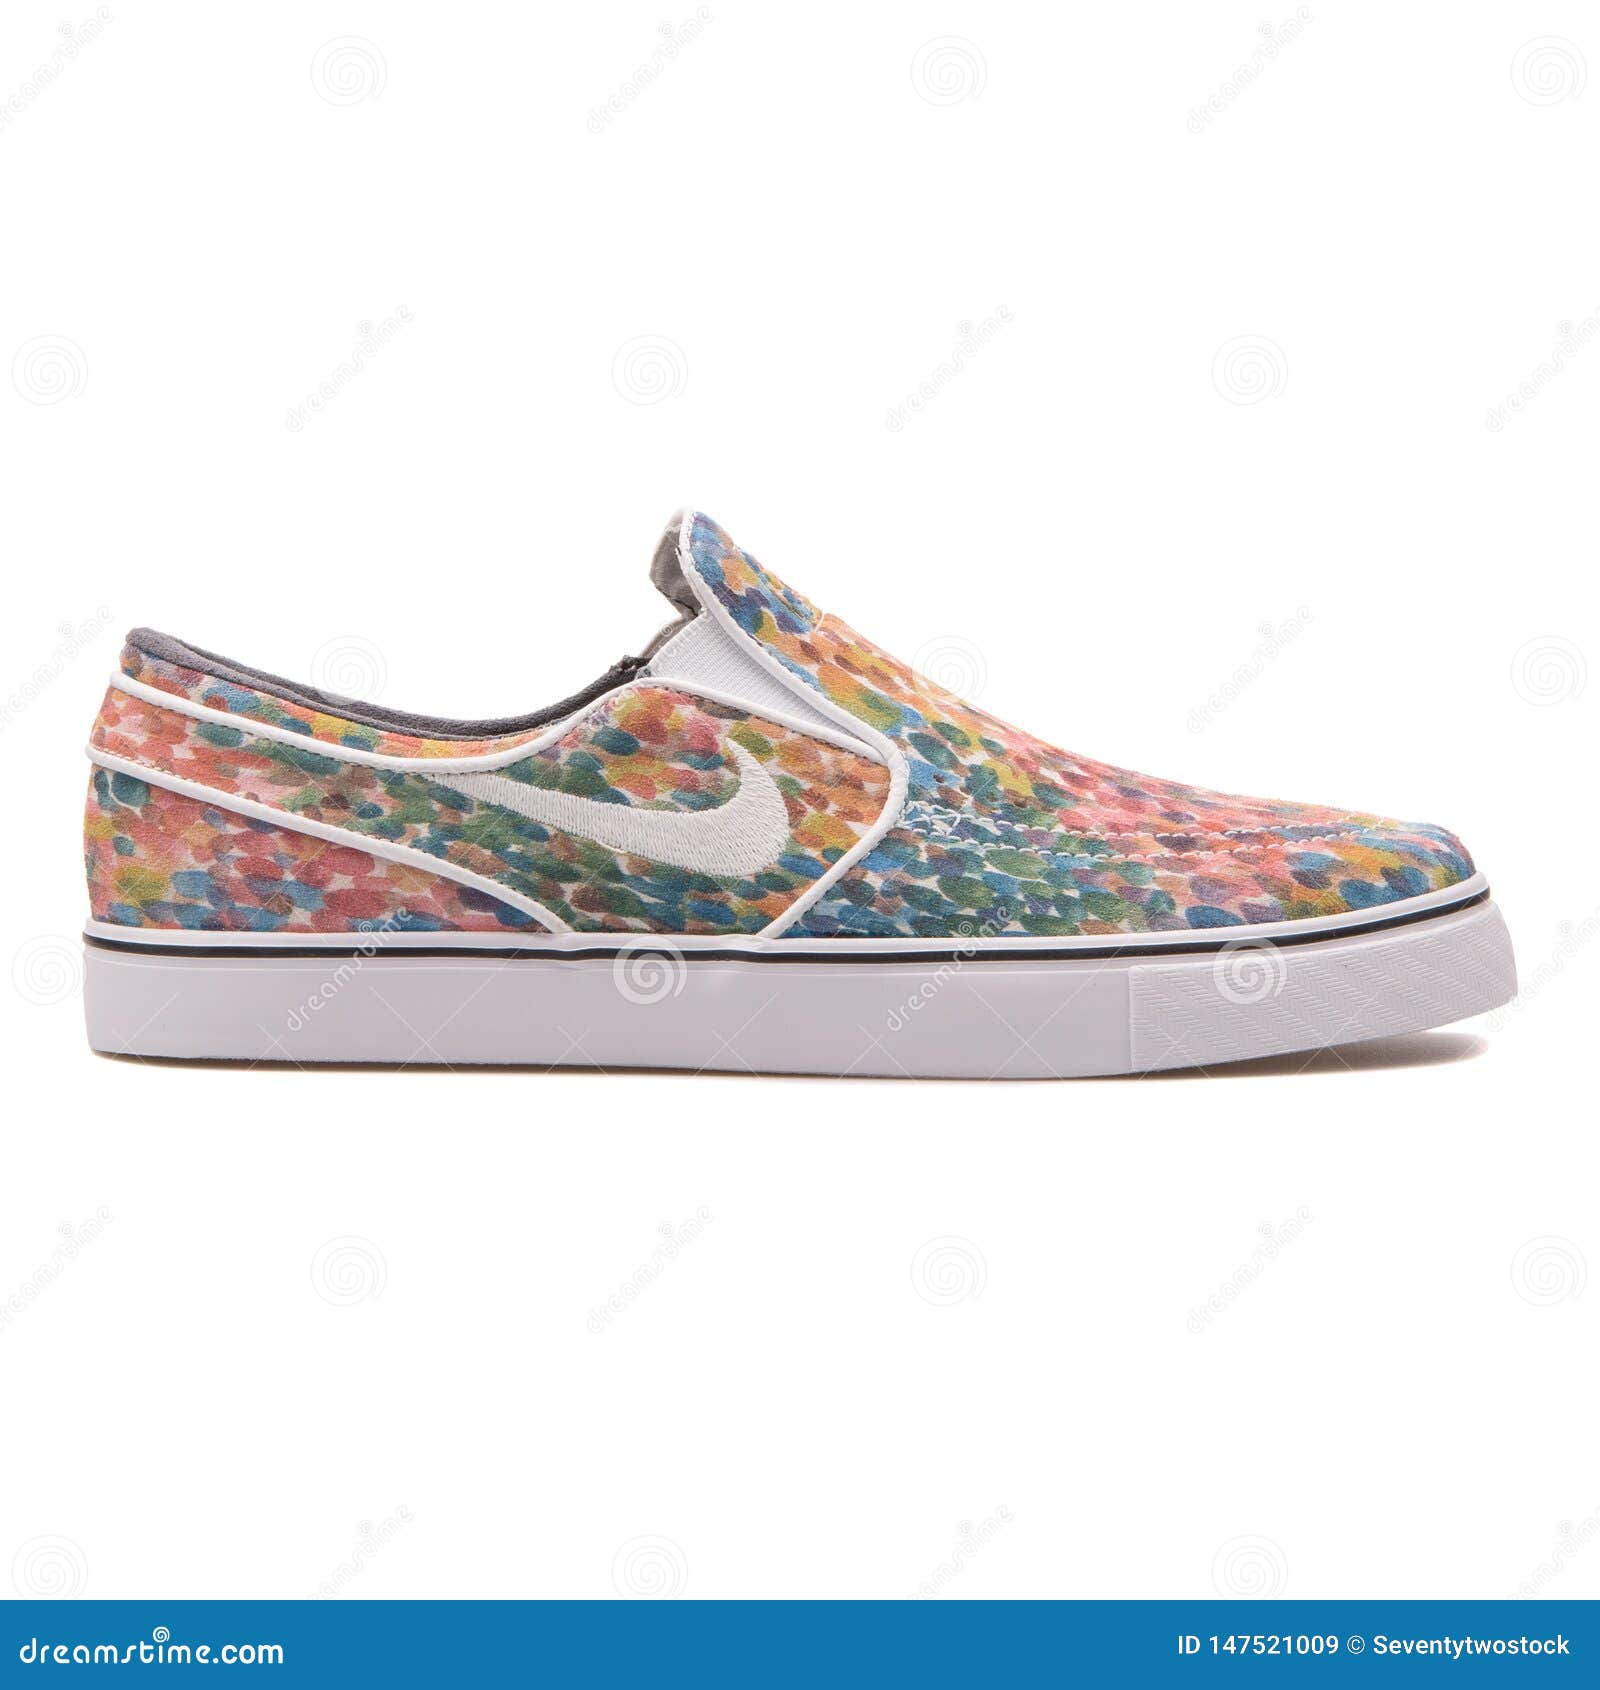 Nike Zoom Janoski Multi Color Sneaker Editorial Stock Image Image of activity, color: 147521009